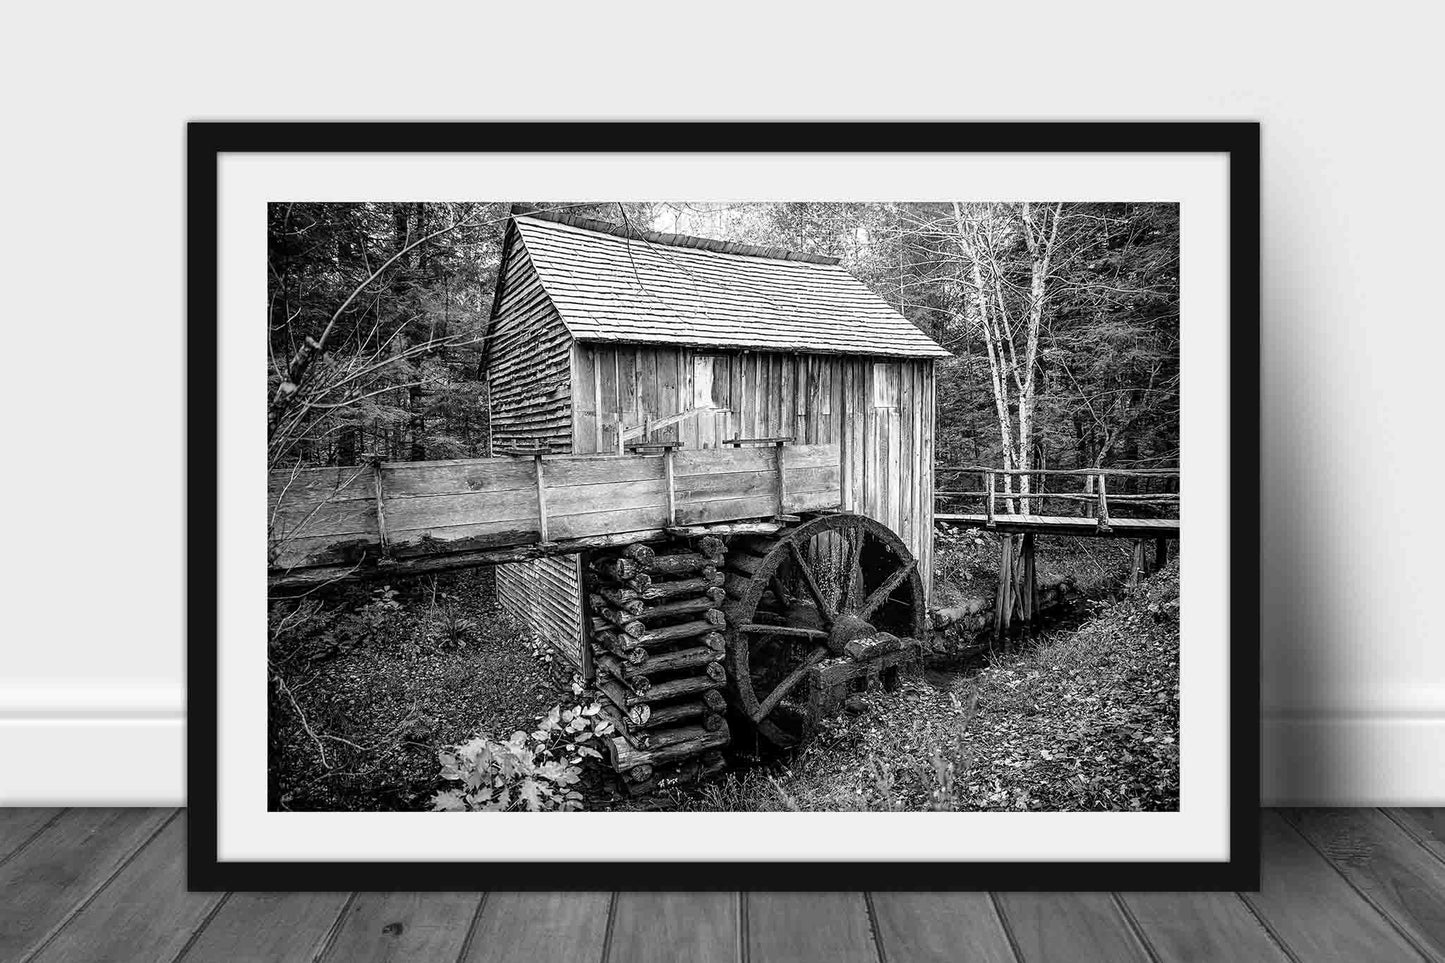 Framed and matted black and white print of the John Cable Mill on a late autumn day at Cades Cove in the Great Smoky Mountains of Tennessee by Sean Ramsey of Southern Plains Photography.